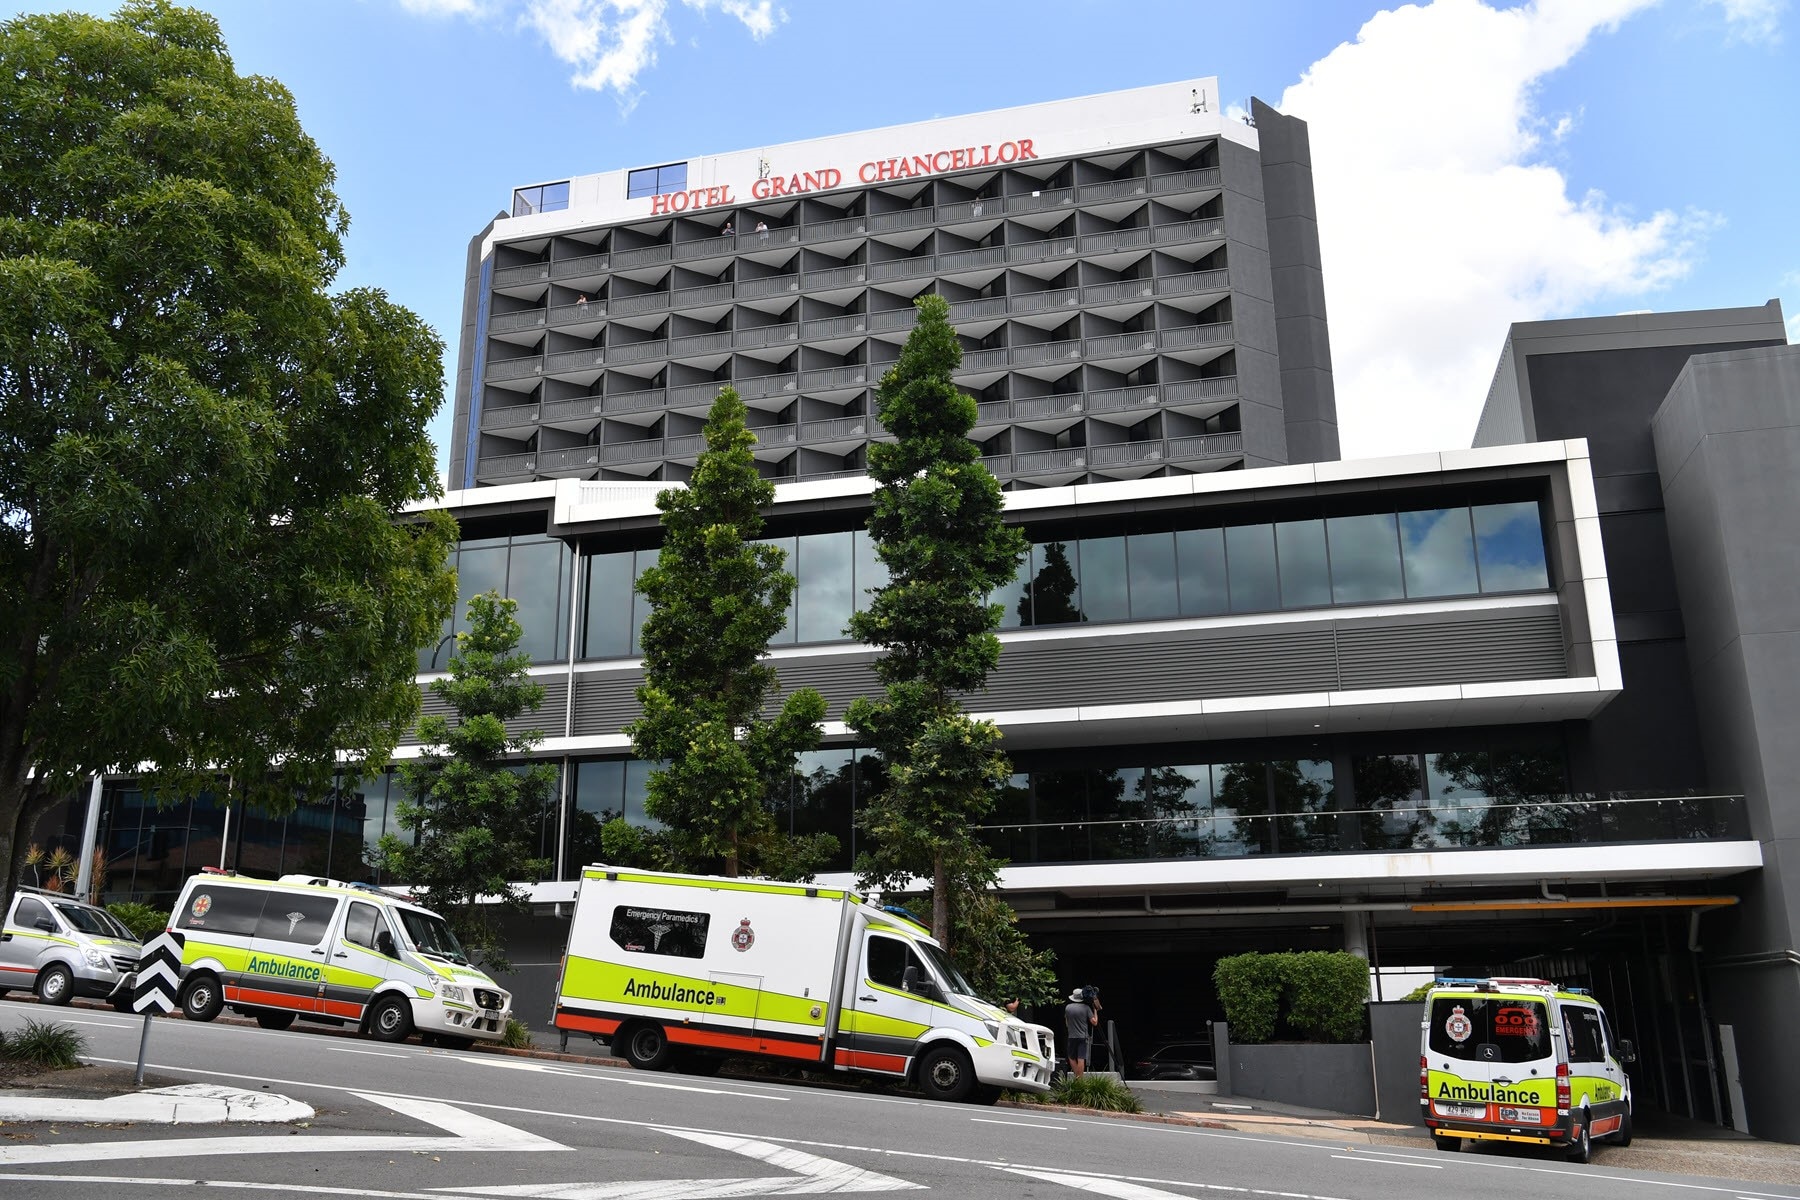 Queensland authorities deny possible virus safety breach after reports  infected woman left hotel quarantine